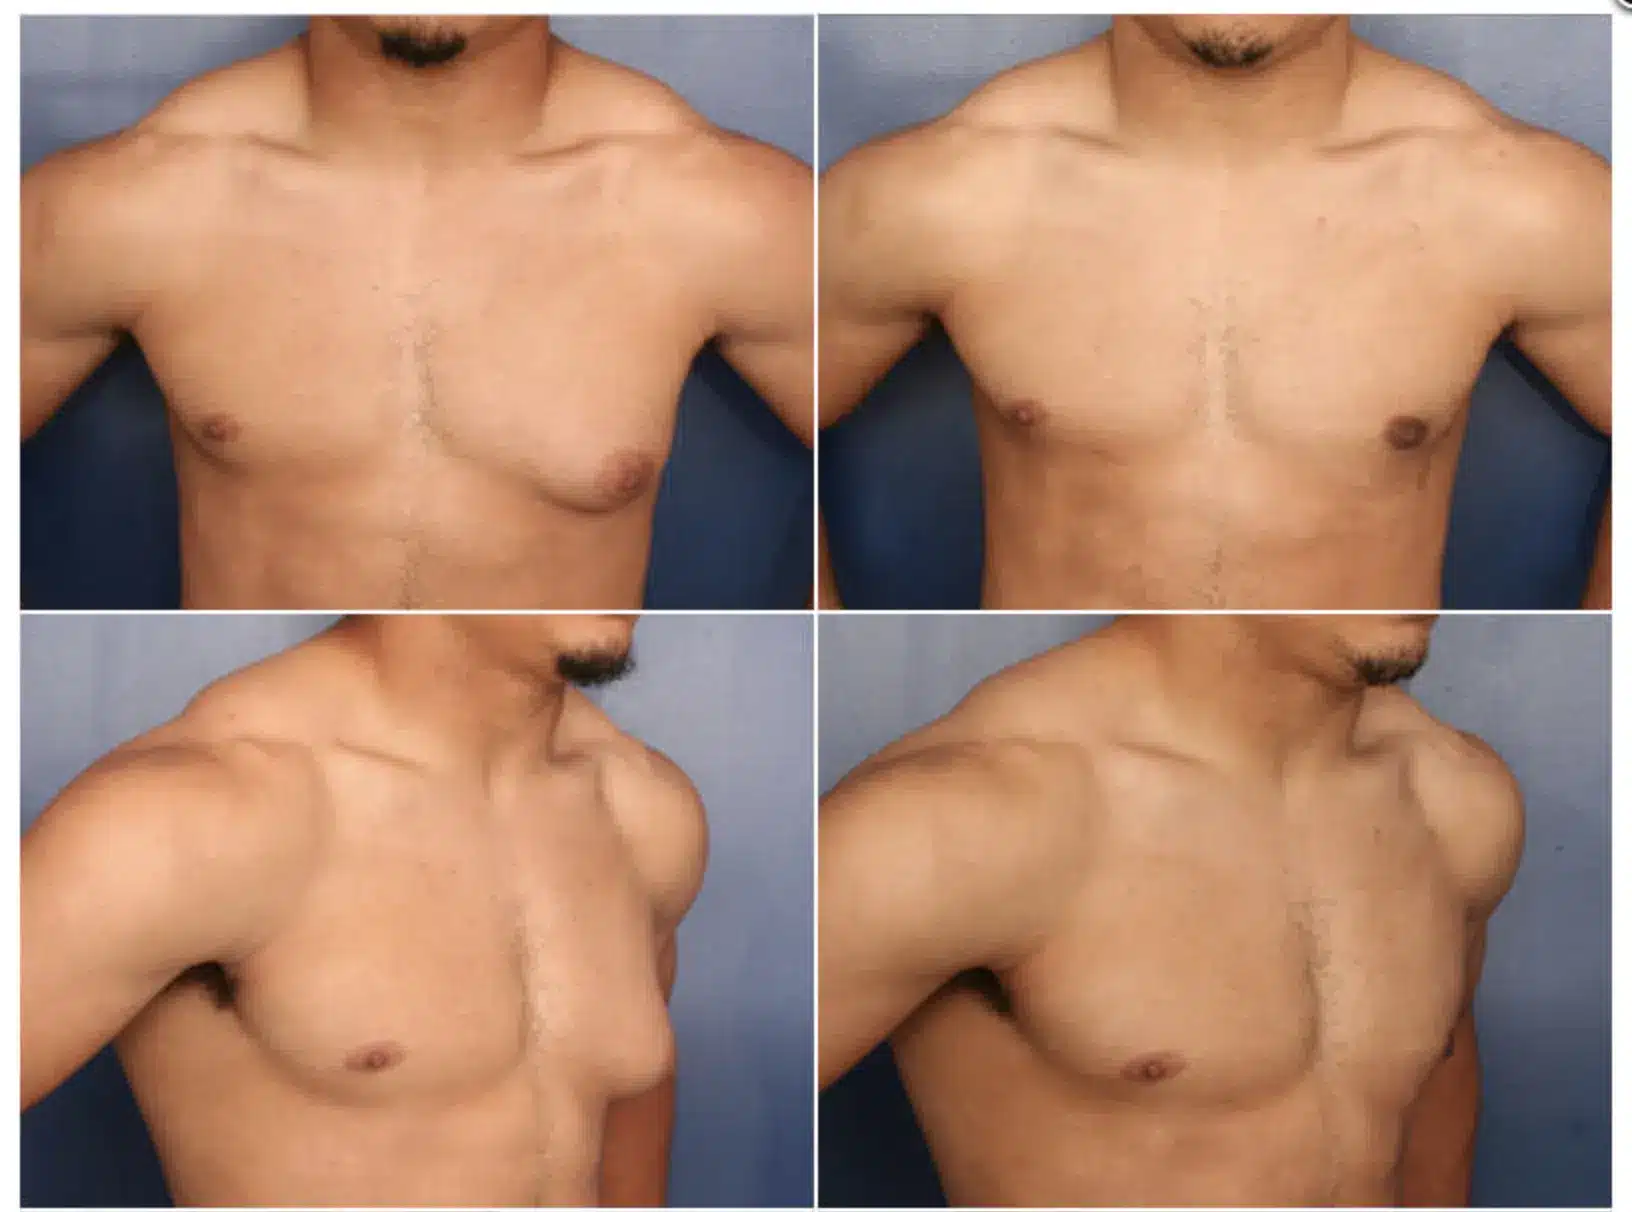 before after gynecomastia surgery